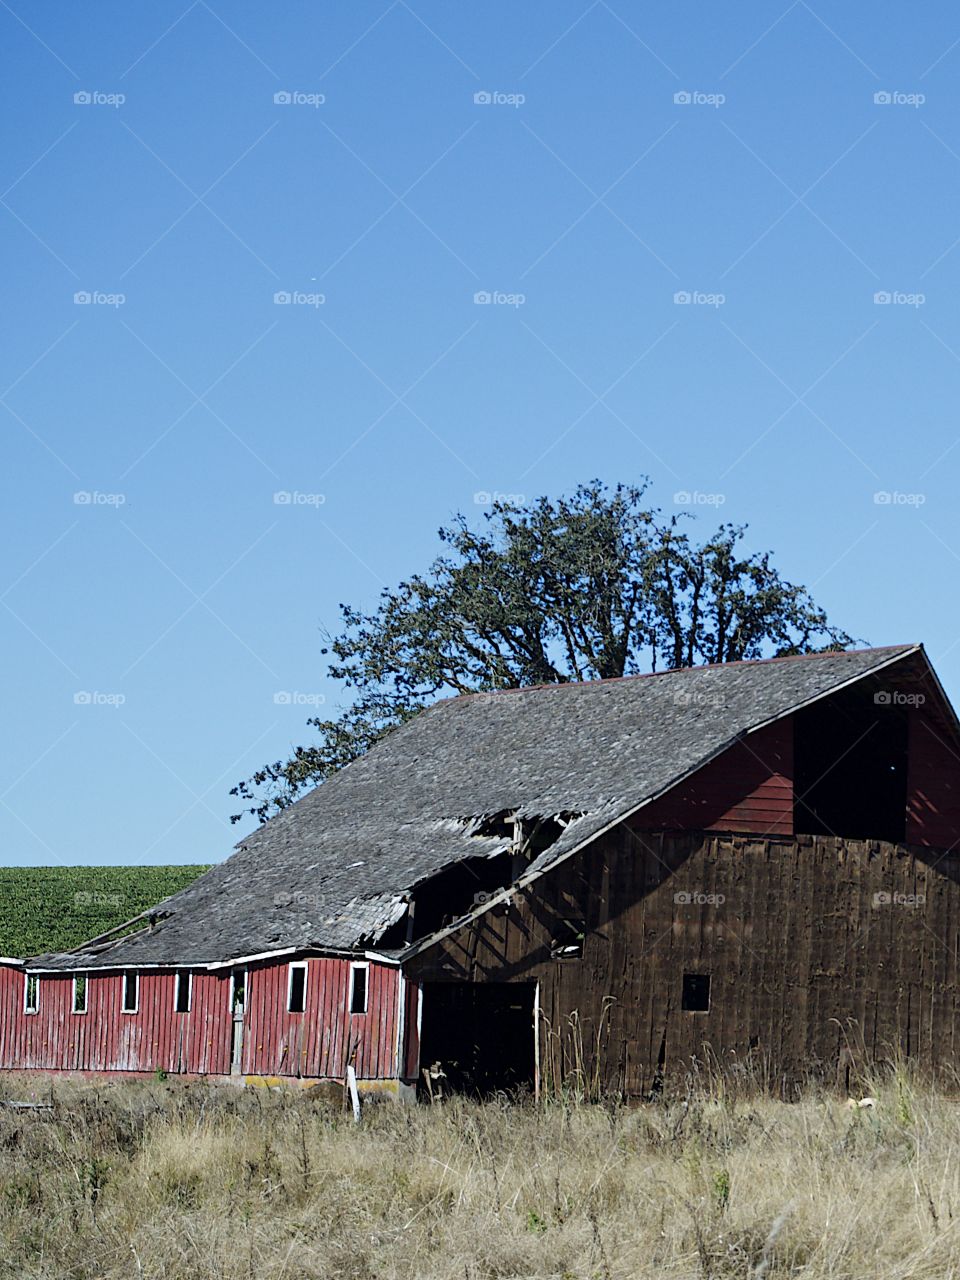 A broken down old red barn next to a field with shade trees in the rural farmland of Western Oregon sunny fall day. 